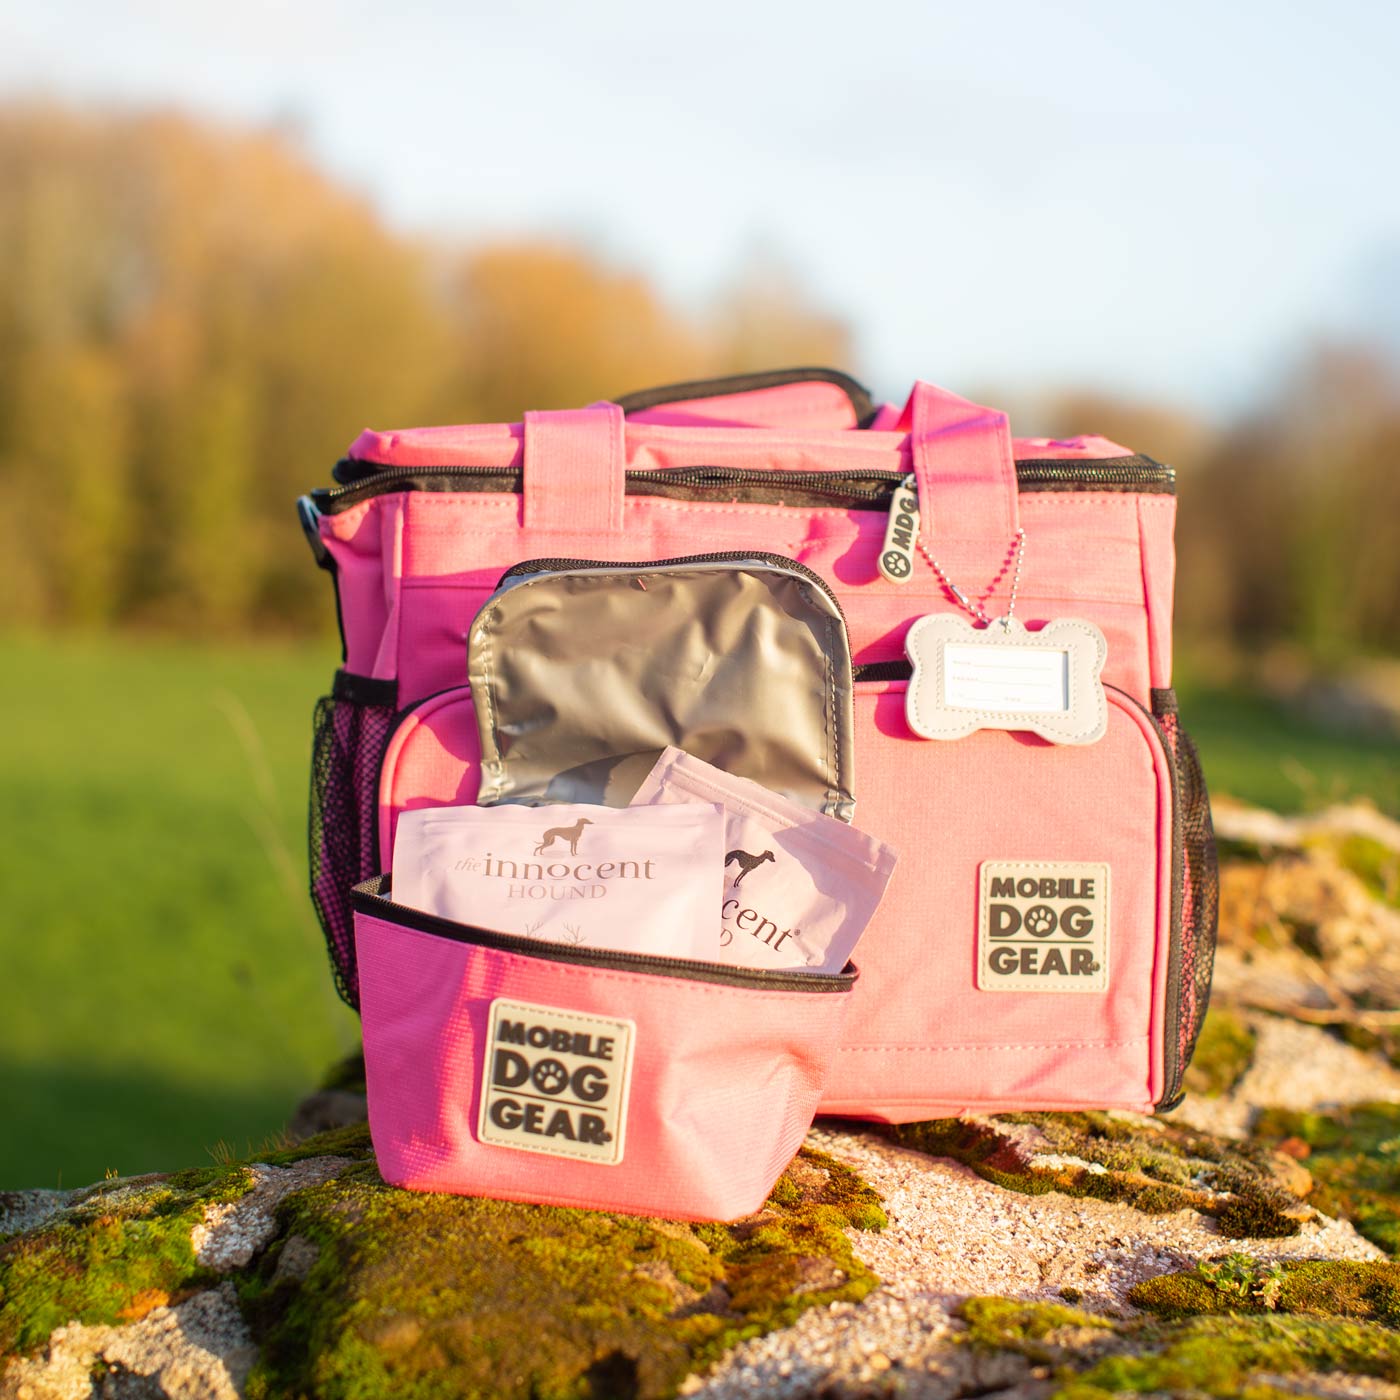 Discover, Mobile Dog Gear Week Away Bag, in Pink. The Perfect Away Bag for any Pet Parent, Featuring dividers to stack food and built in waste bag dispenser. Also Included feeding set, collapsible silicone bowls and placemat! The Perfect Gift For travel, meets airline requirements. Available Now at Lords & Labradors US